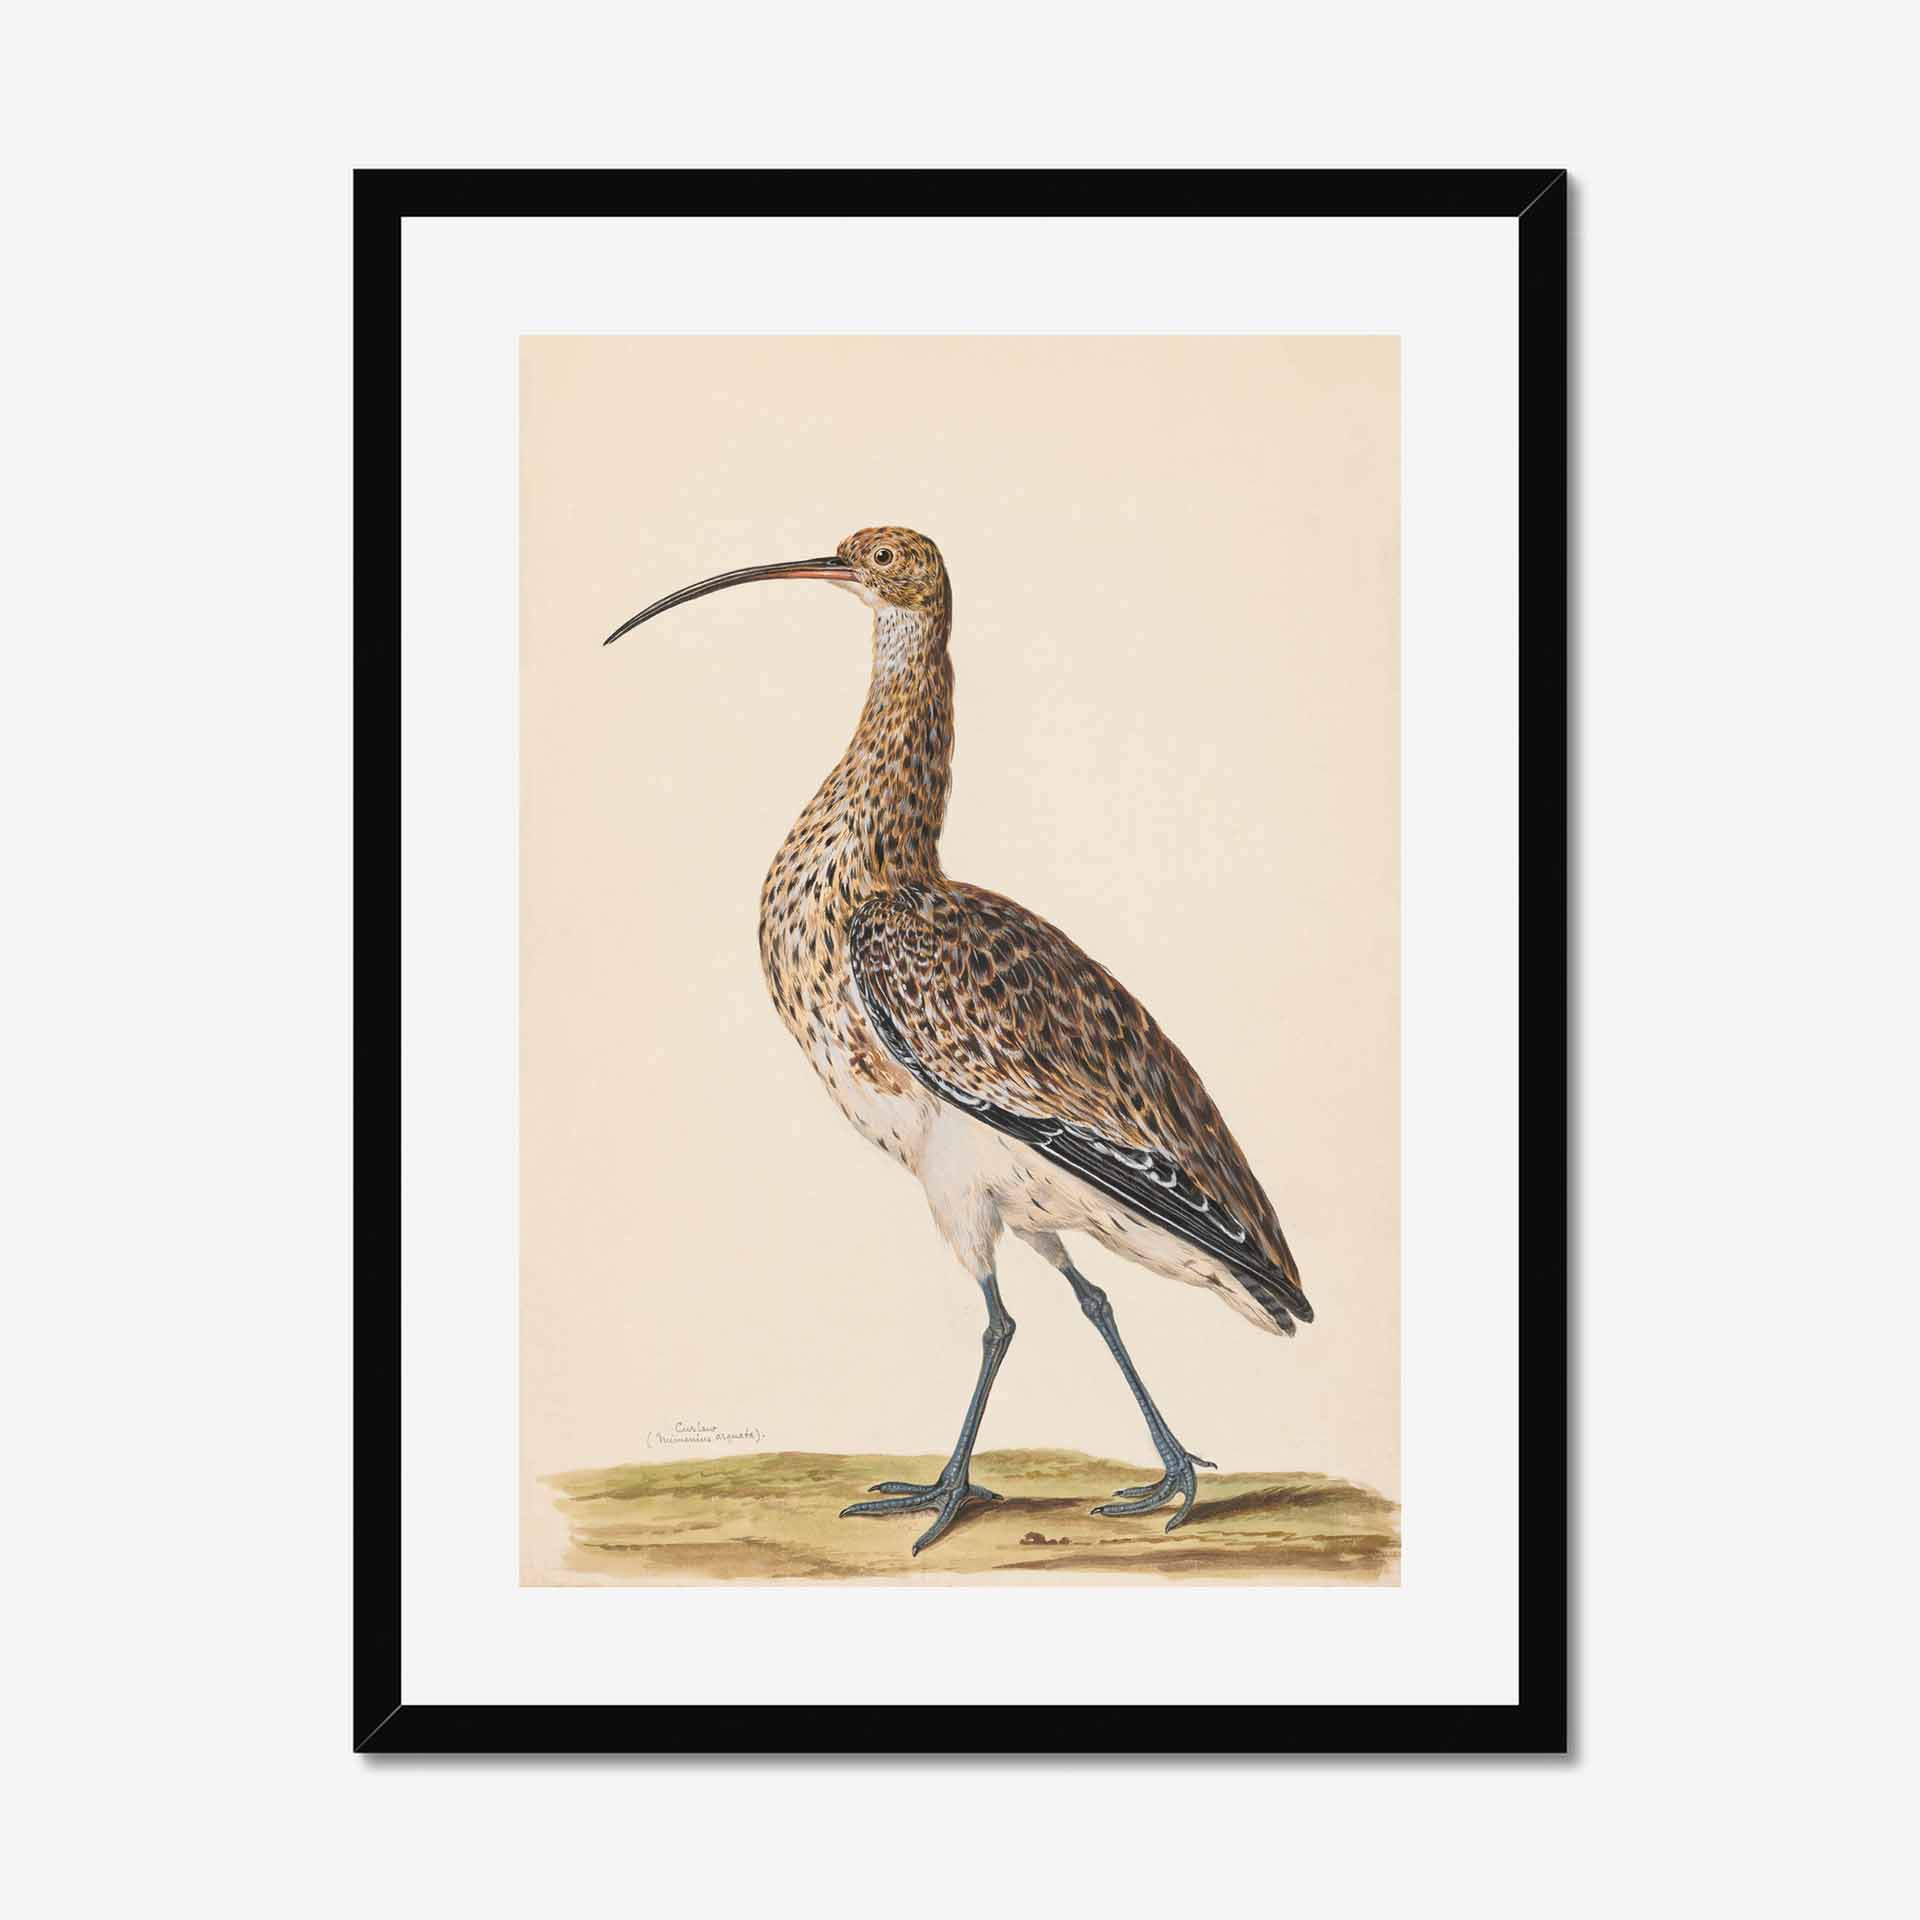 Featured Image For “Curlew Framed Print”